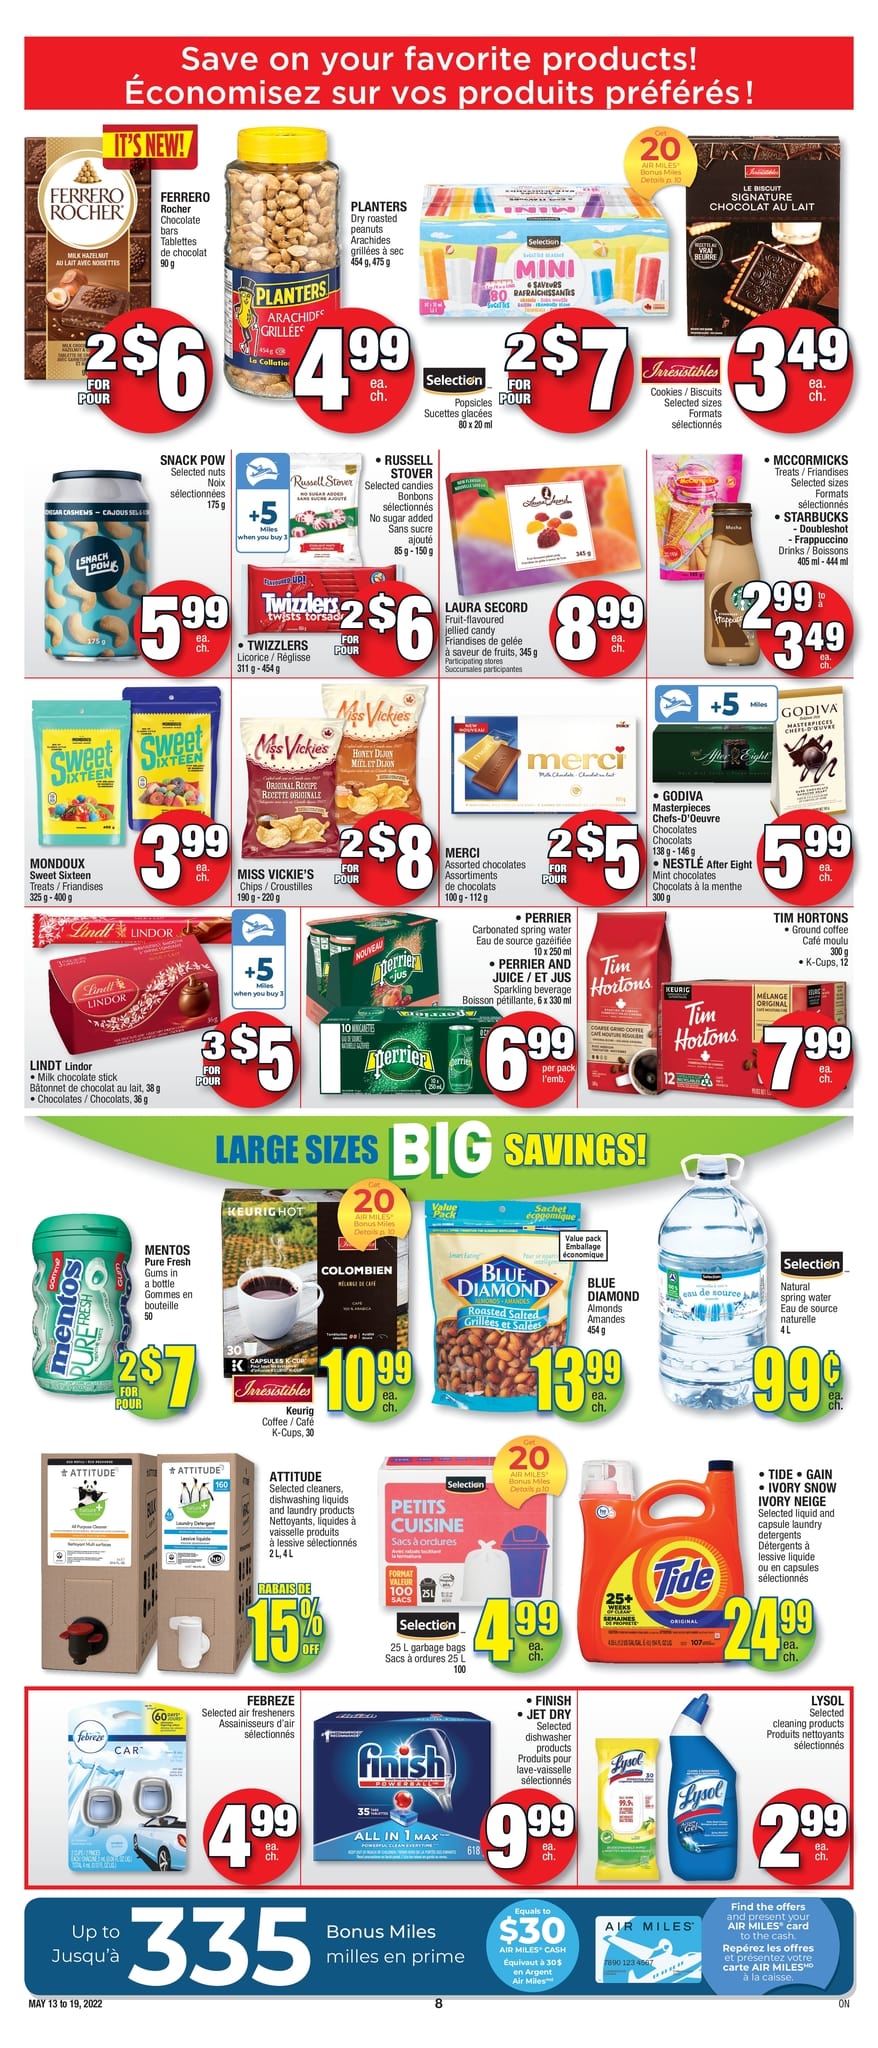 Jean Coutu - Weekly Flyer Specials - Page 8